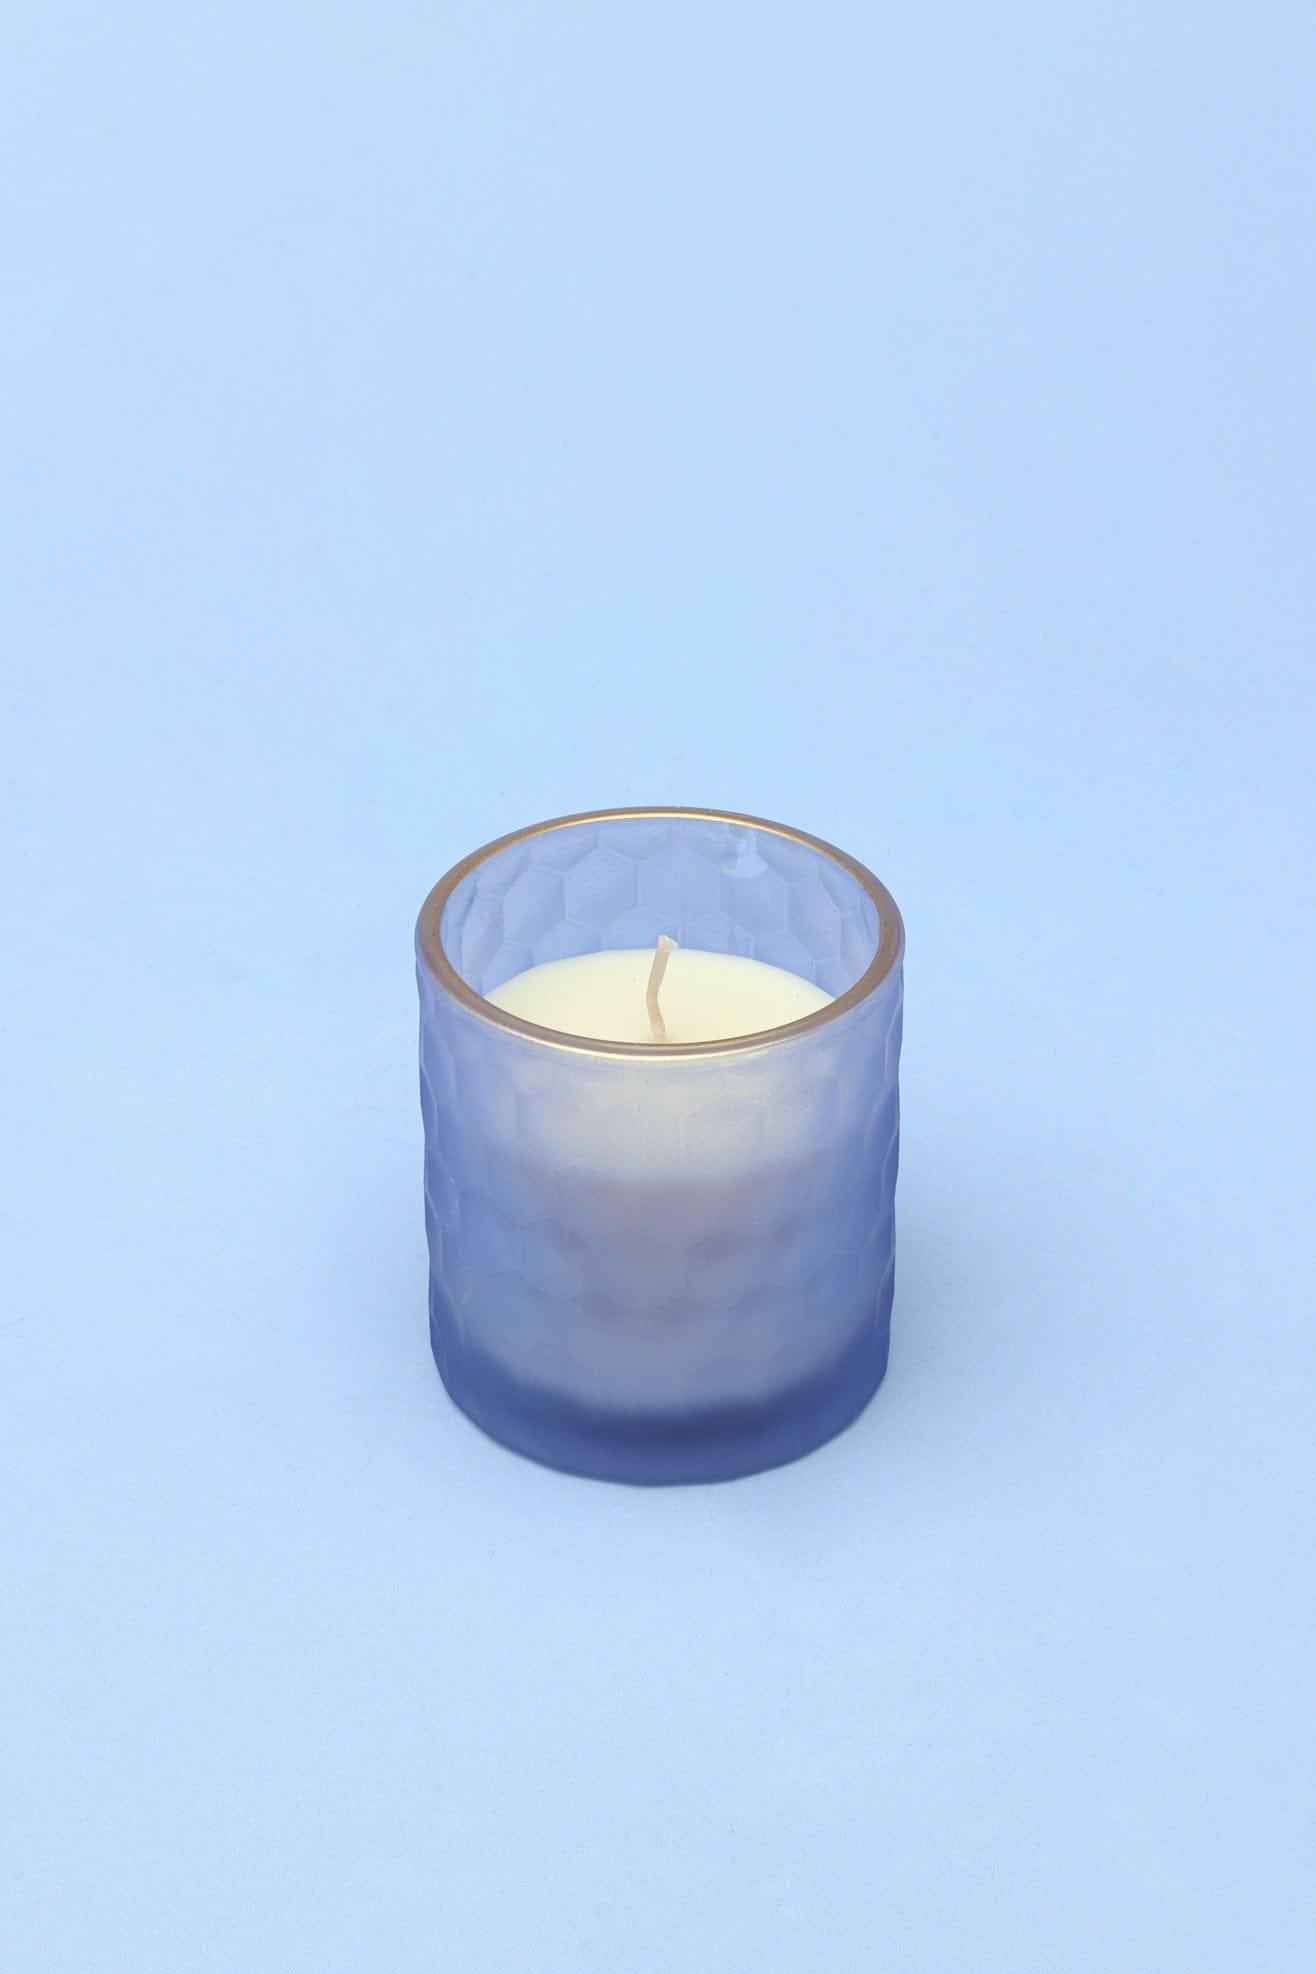 G Decor Candles & Candle Holders Set of Two Havana Pair Scented Sandalwood Soy Wax Textured Purple Blue Glass Jars